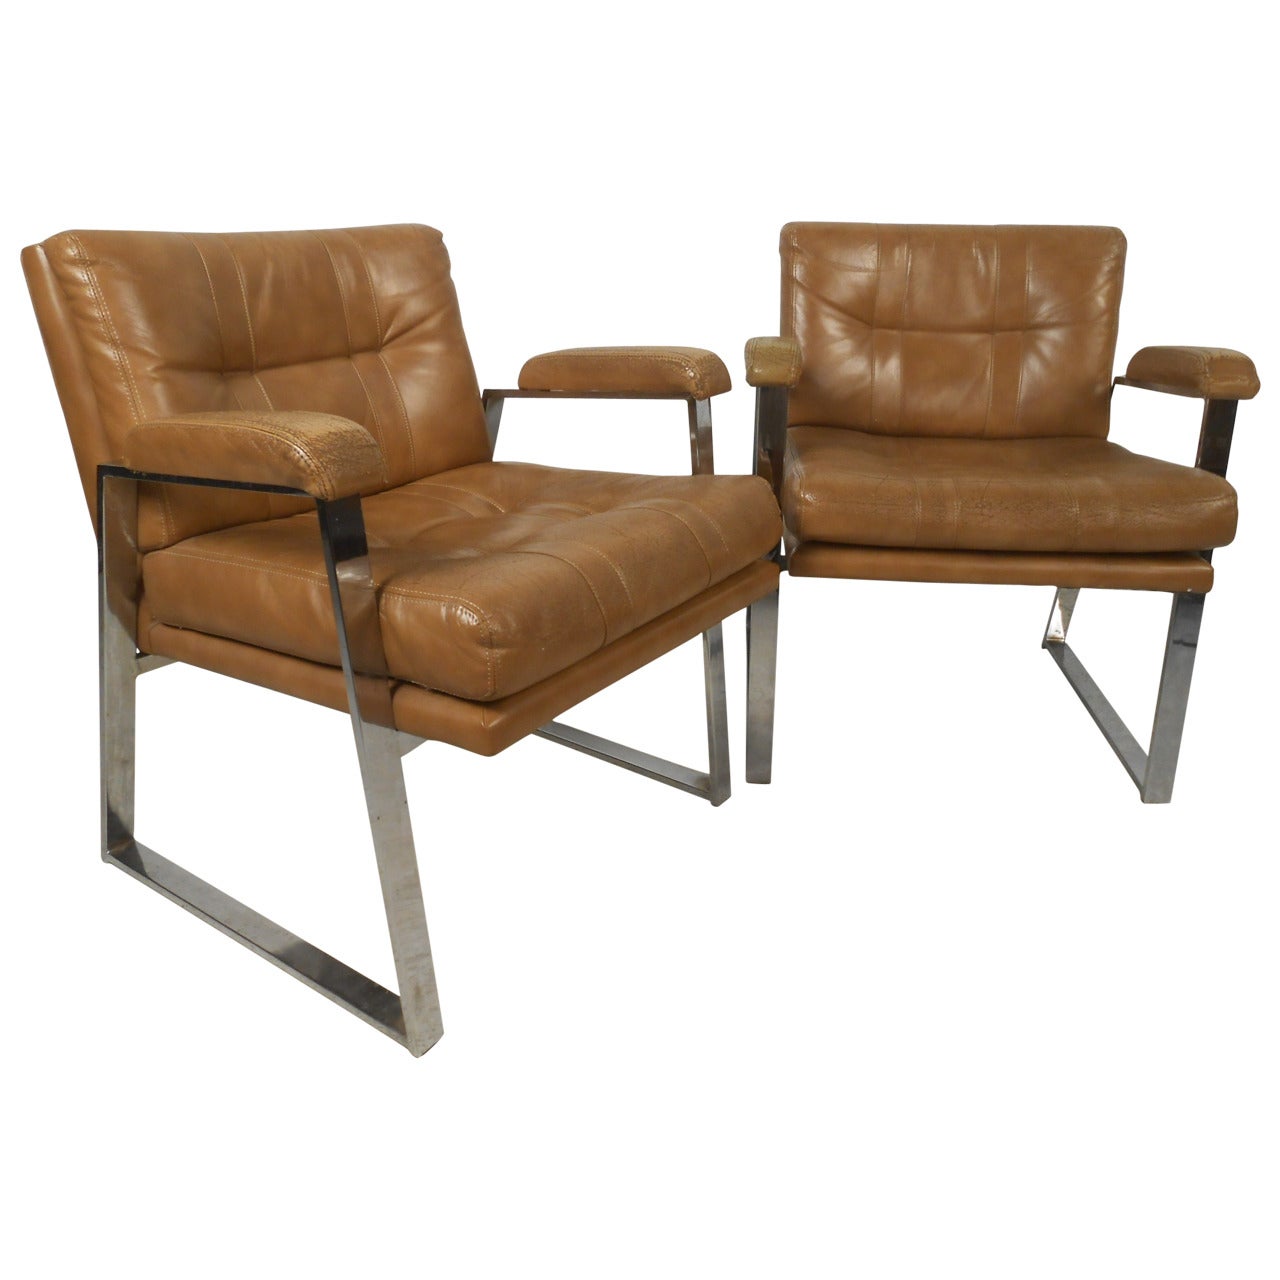 Pair of Midcentury Chrome Side Chairs after Milo Baughman